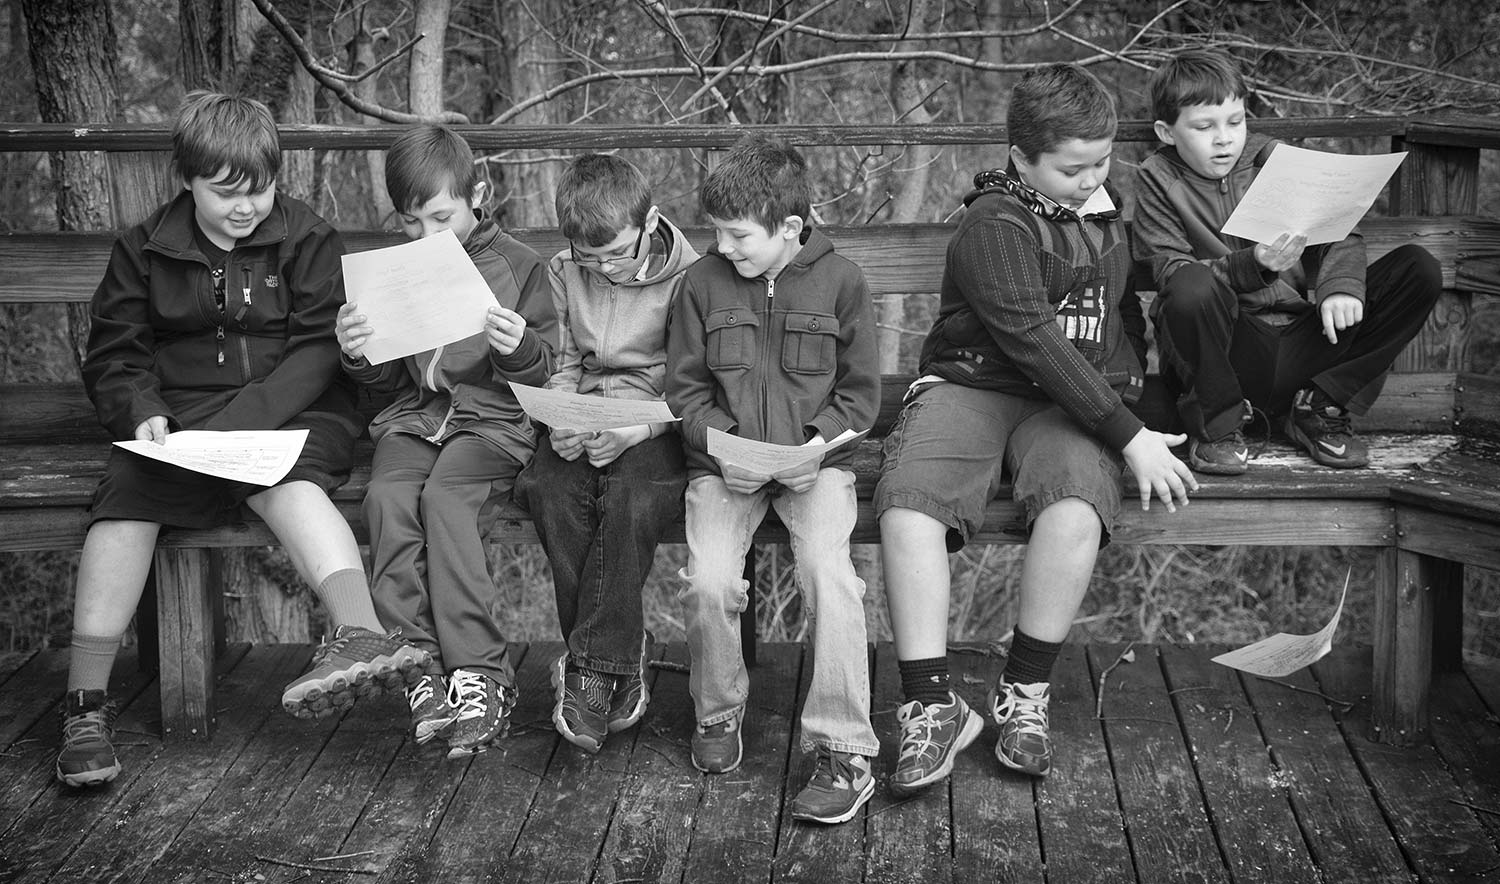 Third graders at Jacksboro elementary school spend time in the Eagleʼs Nest, an outdoor learning center. (from left to right) Mason Artz, Matt Stevens, Jesse Brandenburg, Landon Cureton, Chance Woodson and Robby Wilson photo by Cameo Waters - 2016